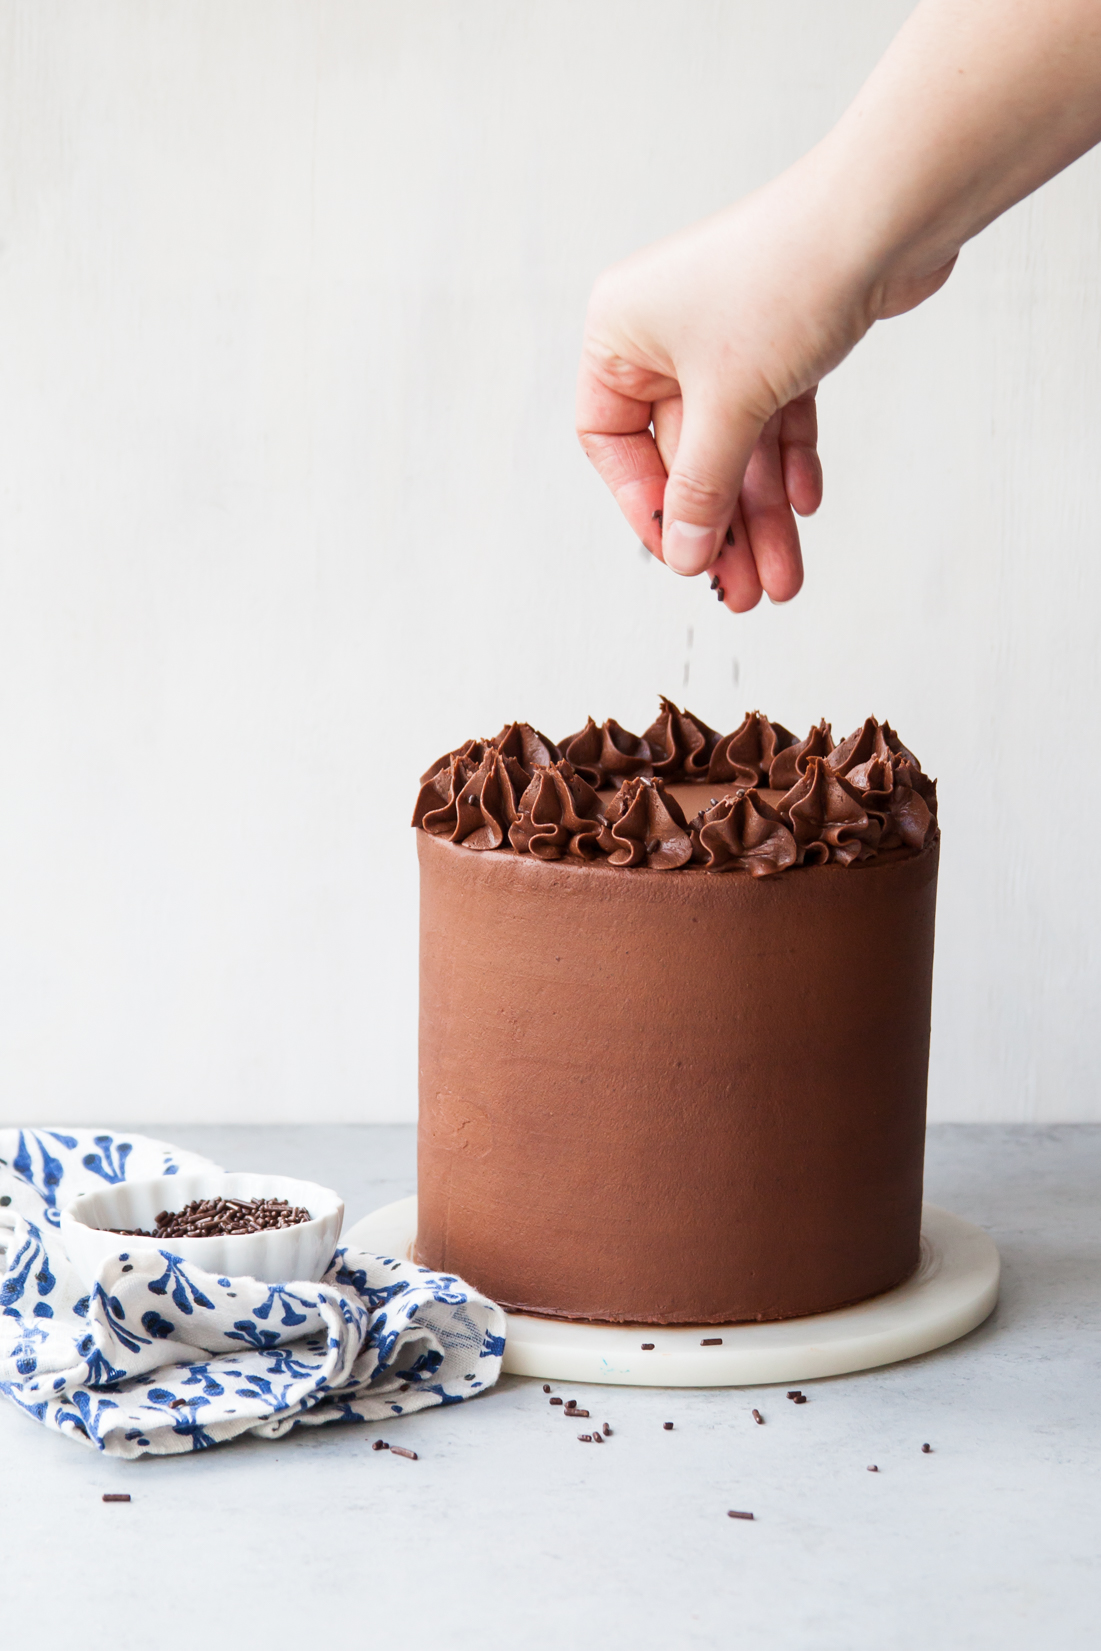 Chocolate Fudge Layer Cake with ombré chocolate filling.